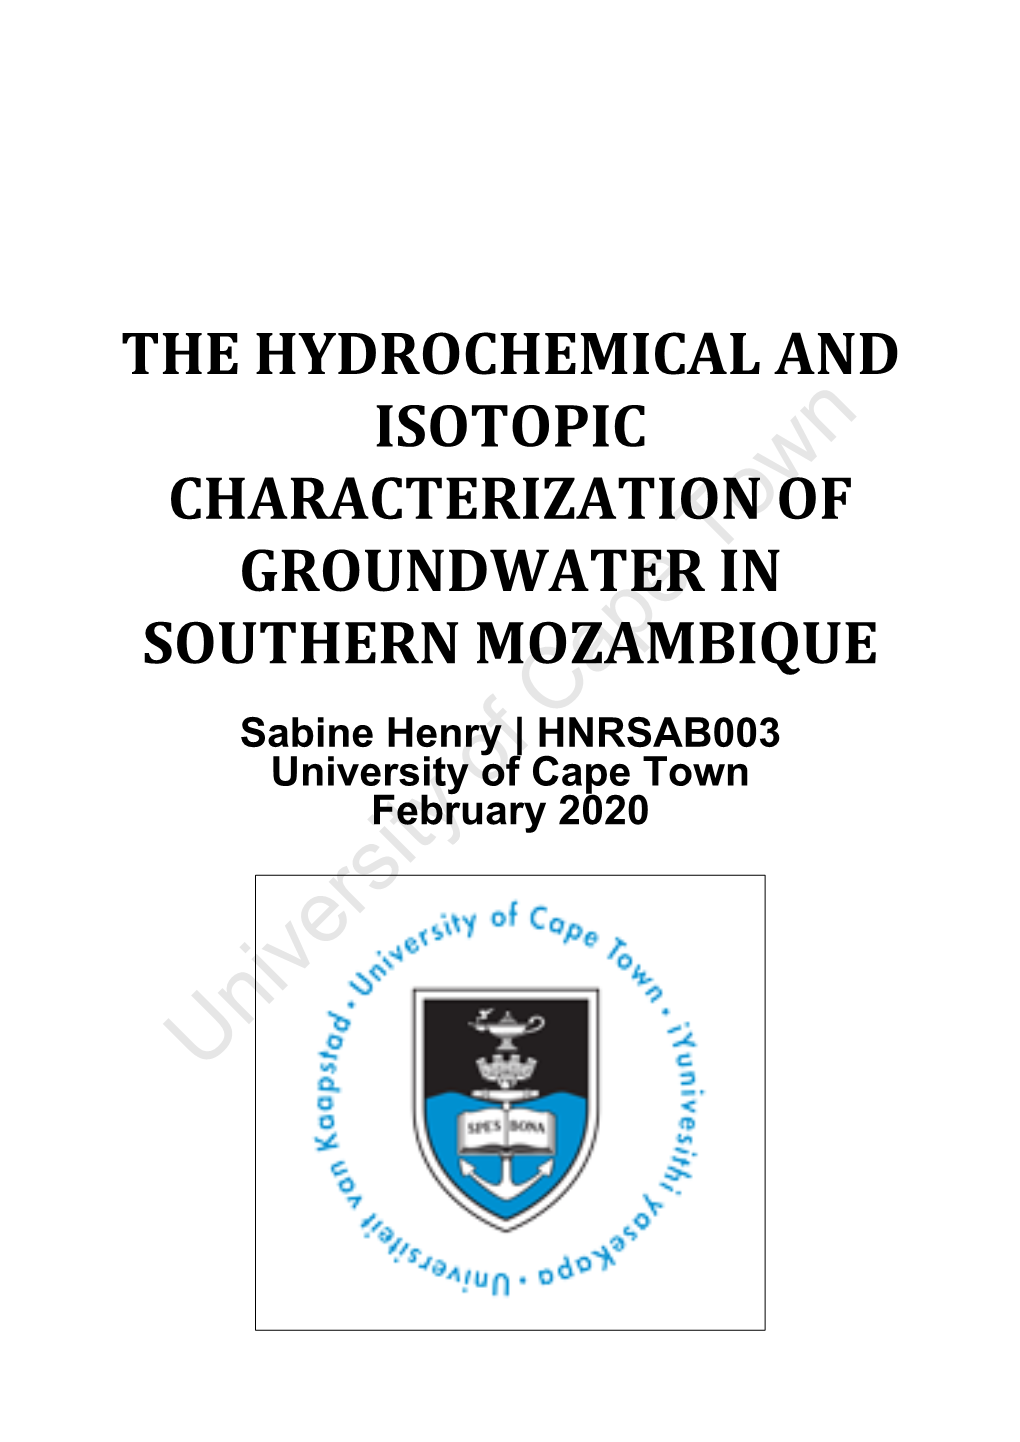 The Hydrochemical and Isotopic Characterization of GROUNDWATER in Southern Mozambique